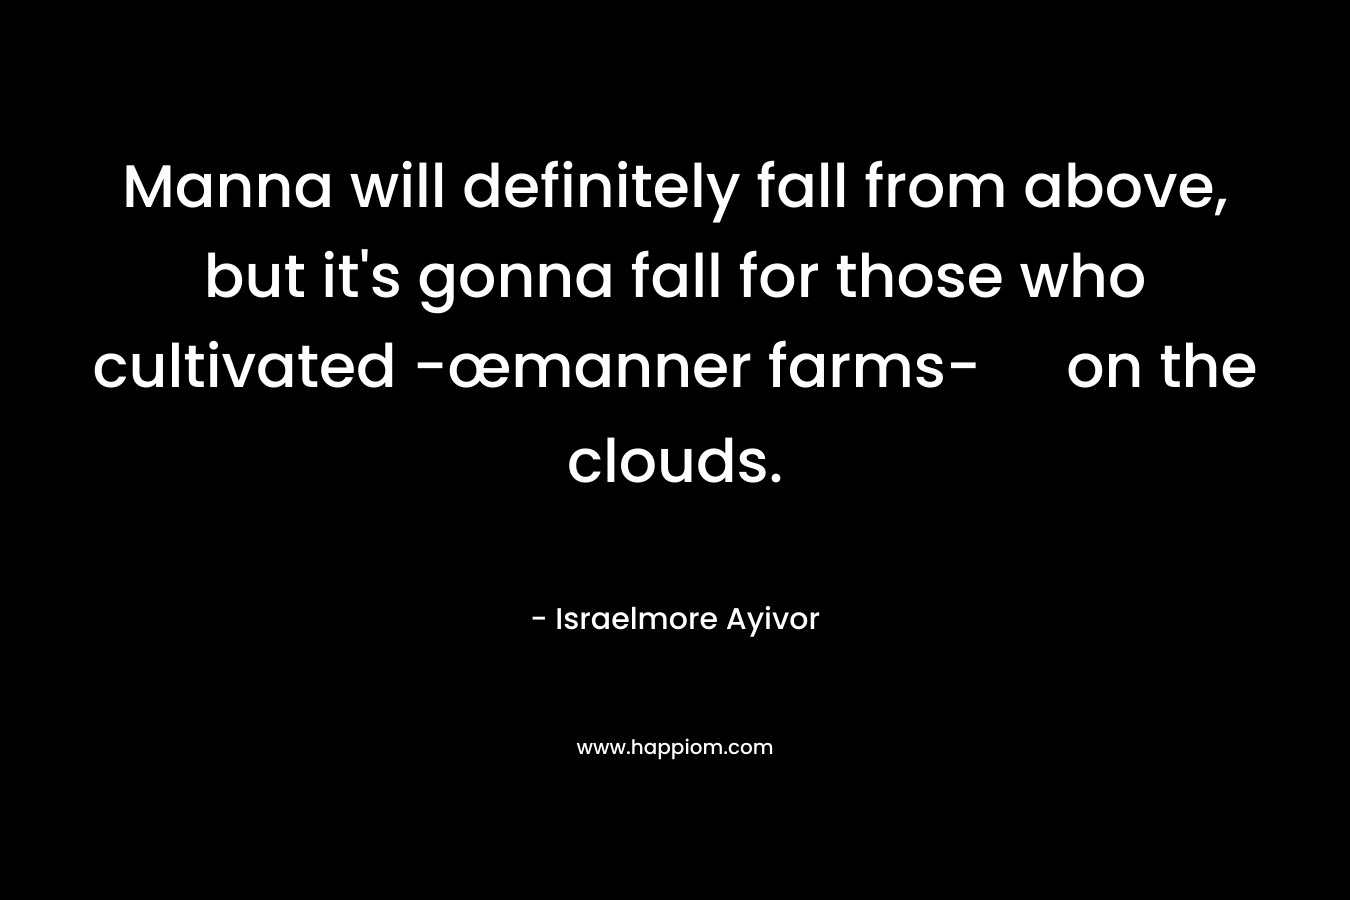 Manna will definitely fall from above, but it’s gonna fall for those who cultivated -œmanner farms- on the clouds. – Israelmore Ayivor